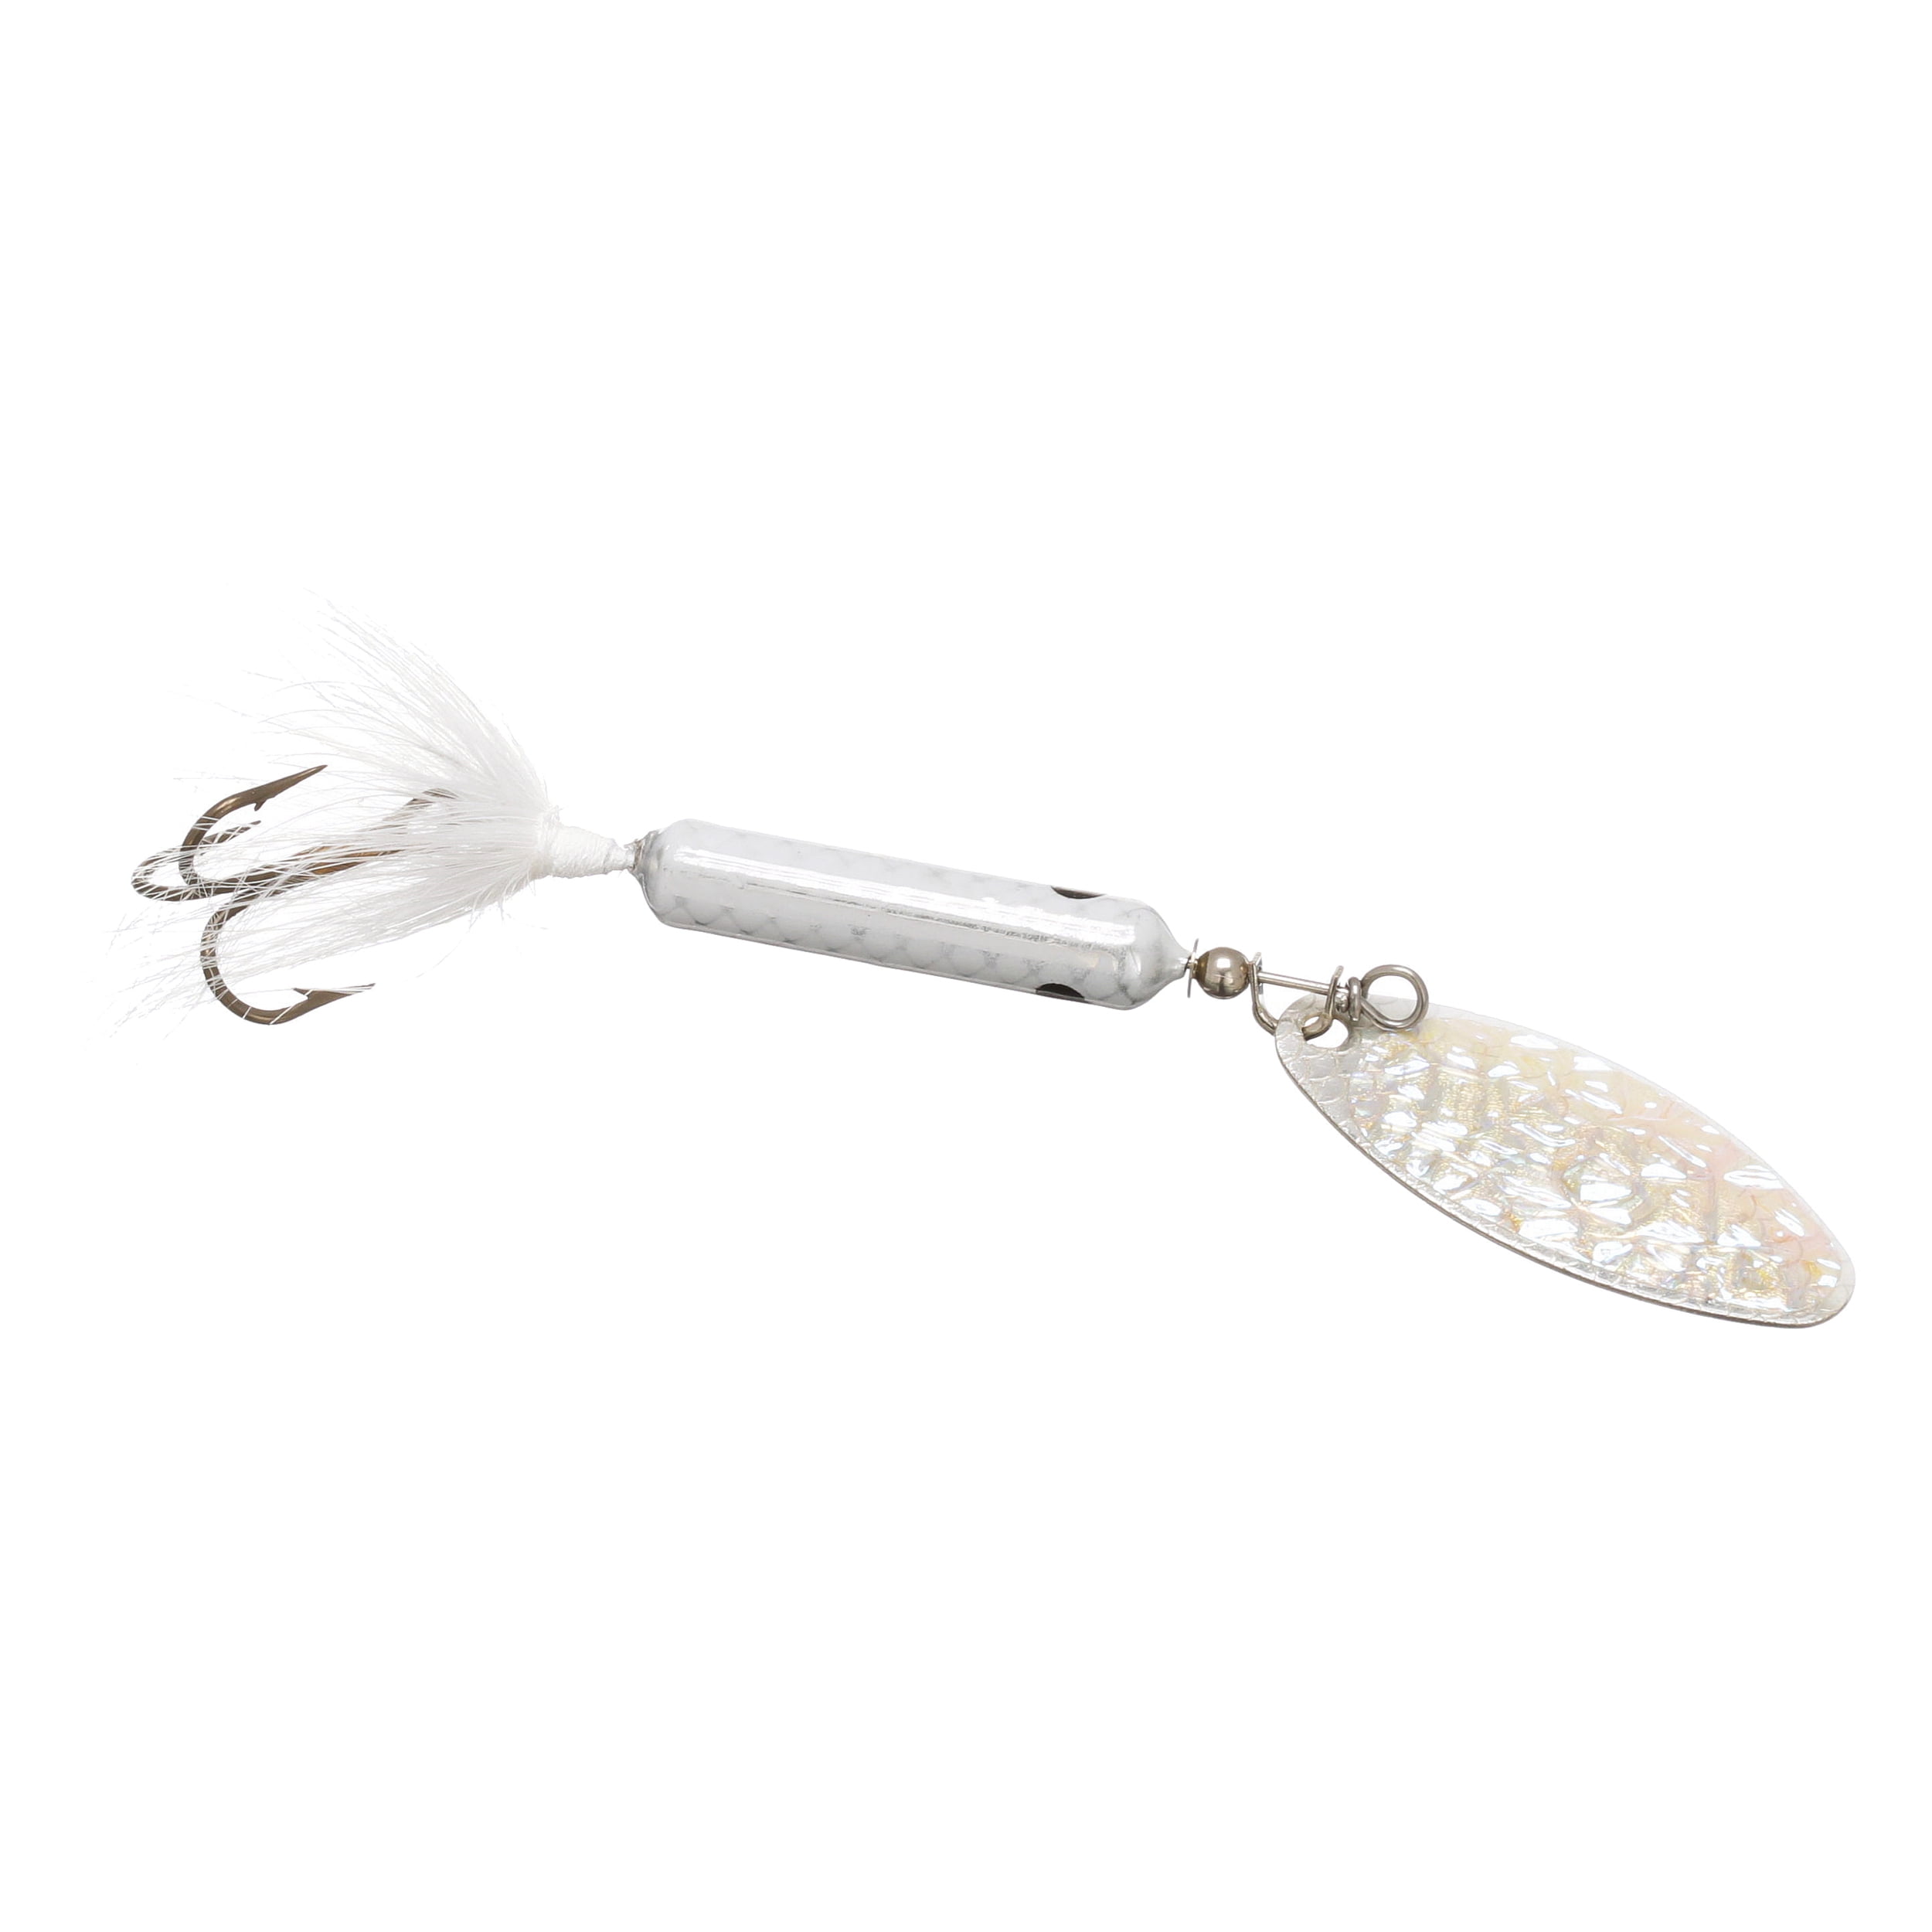 Rooster Tail, Flash White, Inline Spinnerbait Fishing Lure, 3/8 oz